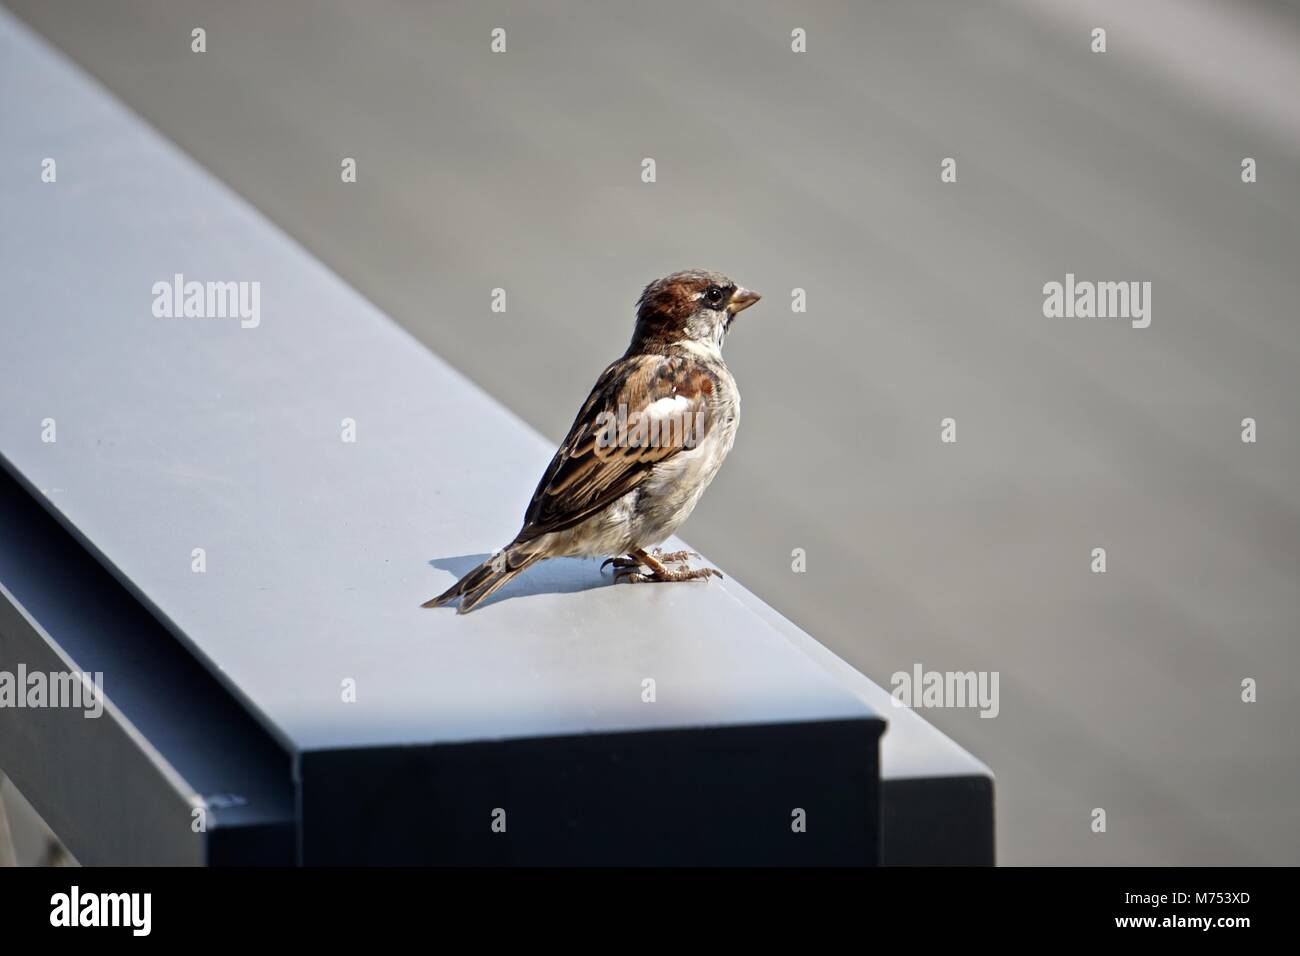 The house sparrow (Passer domesticus) is associated with human habitations, and can live in urban or rural settings. Stock Photo